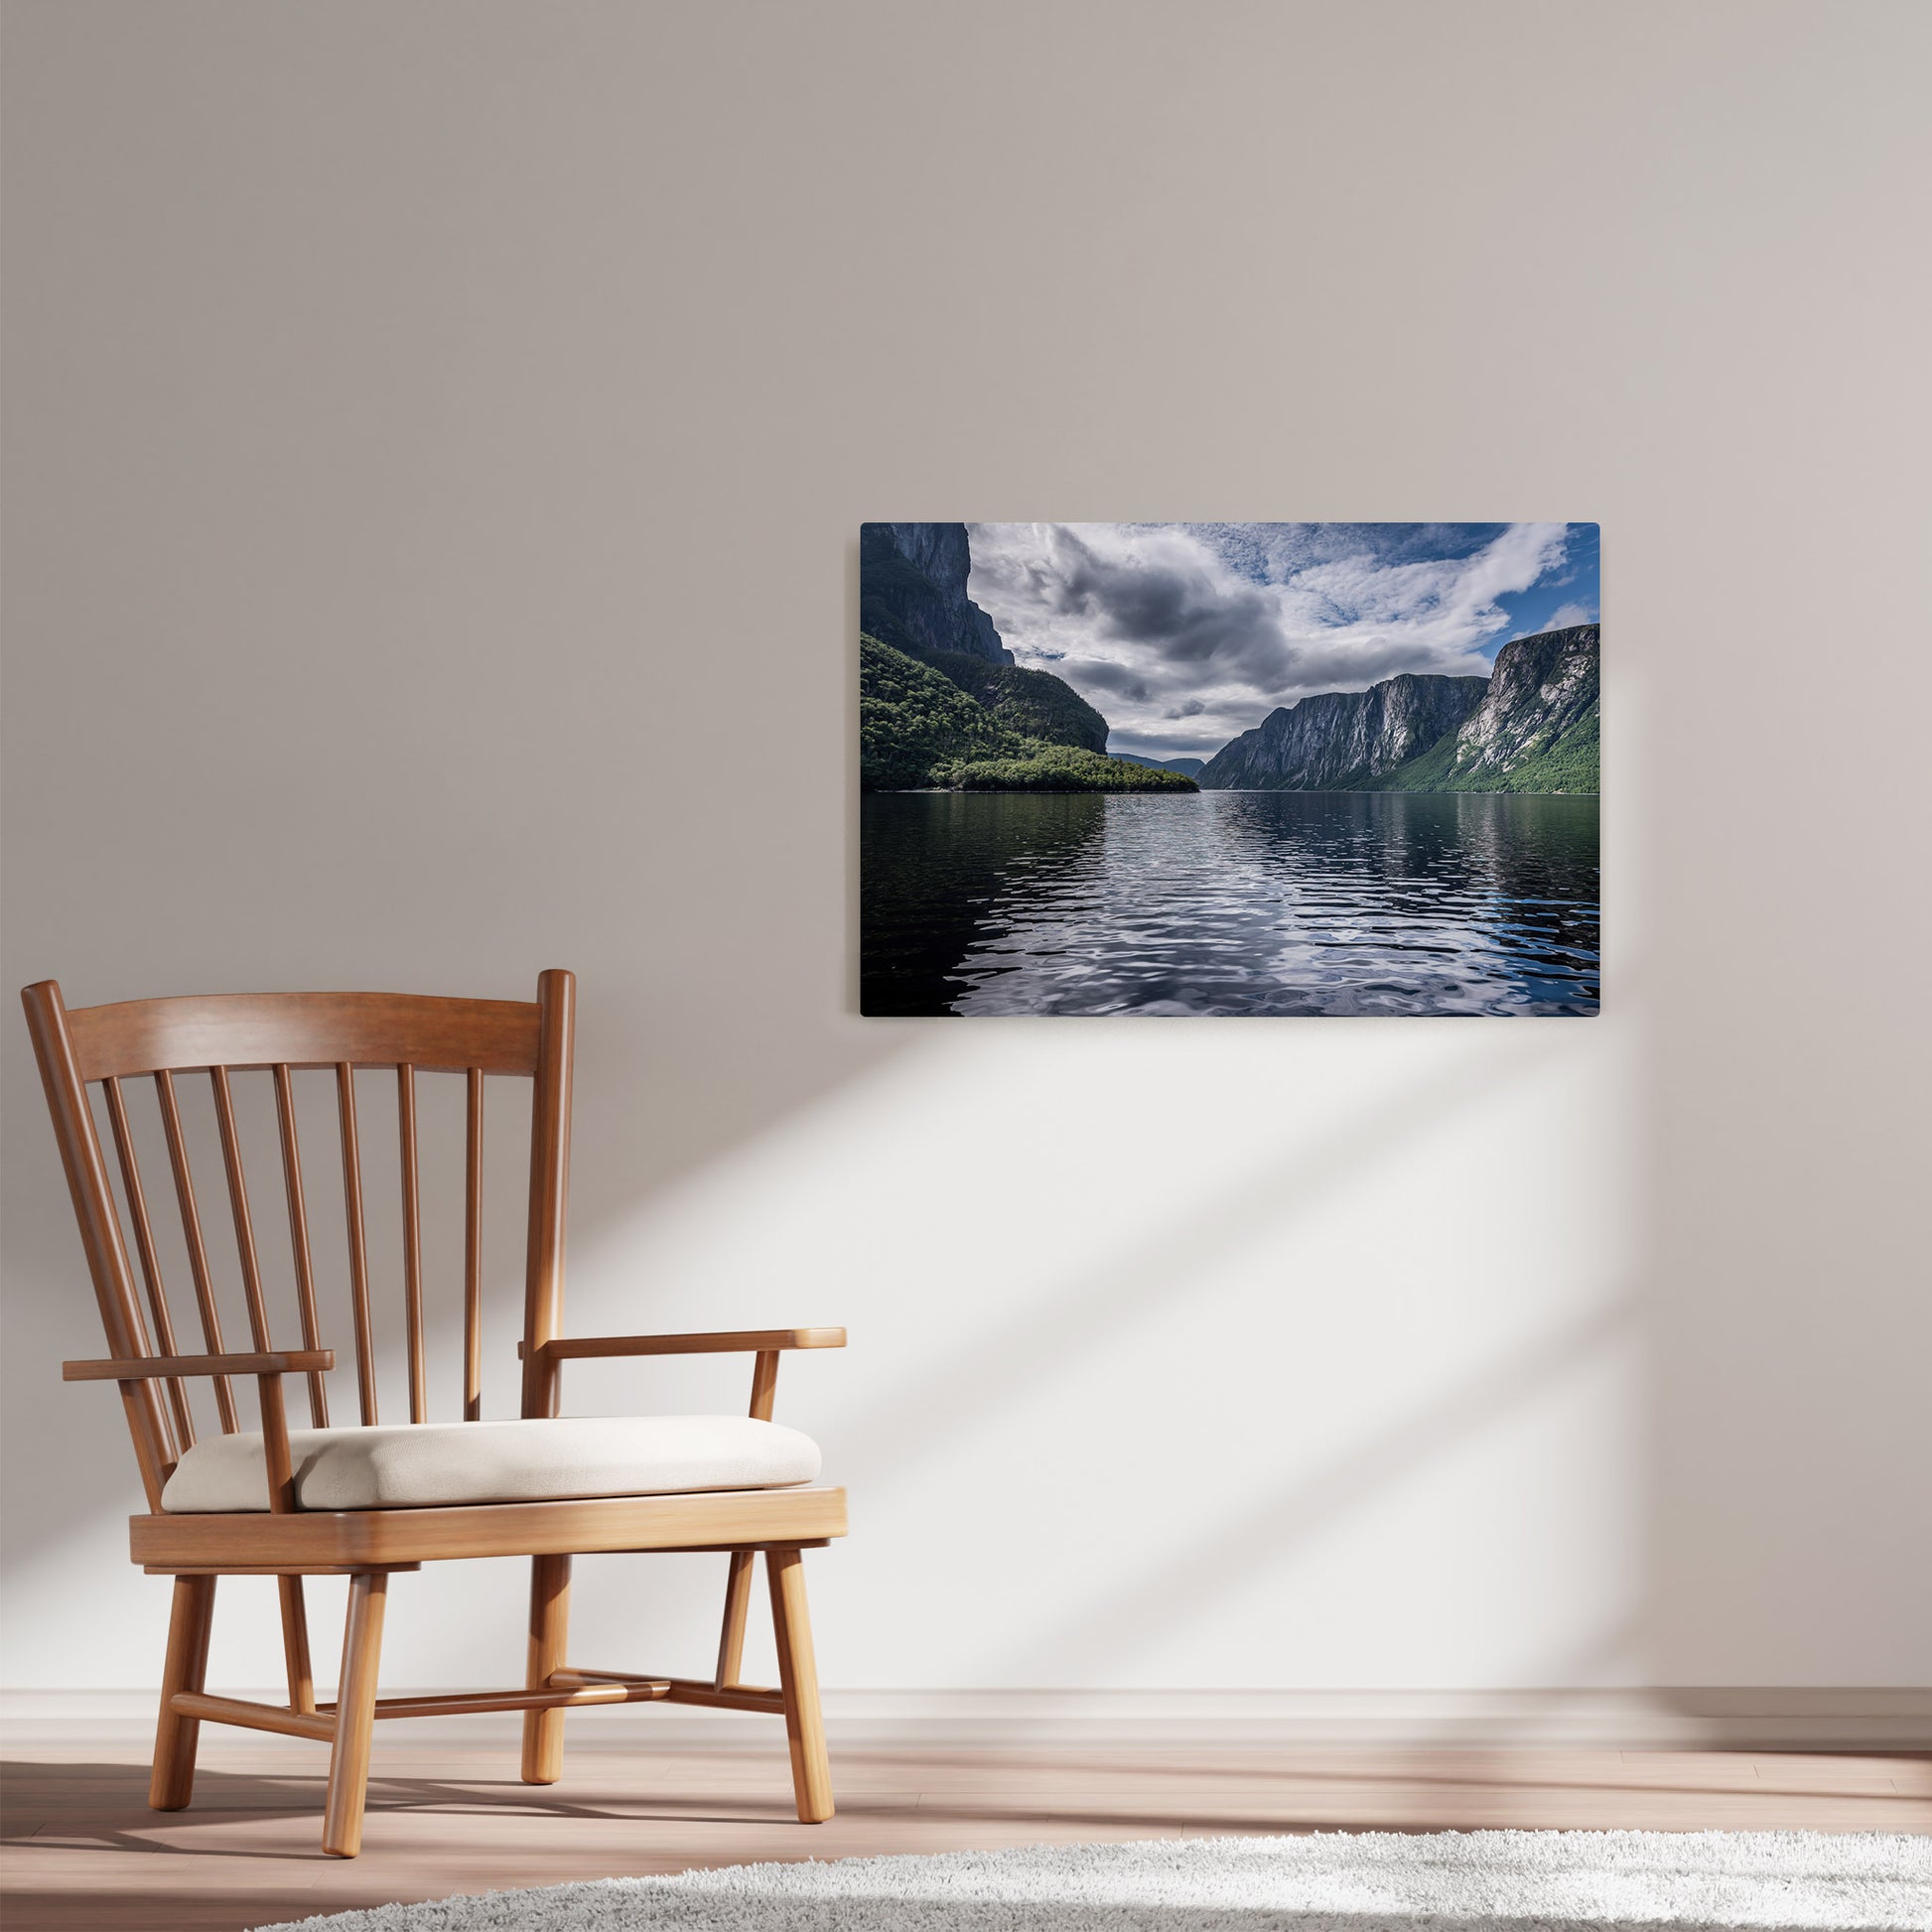 Ray Mackey's Gros Morne Western Brook Pond photography reproduced on HD metal print and displayed on wall